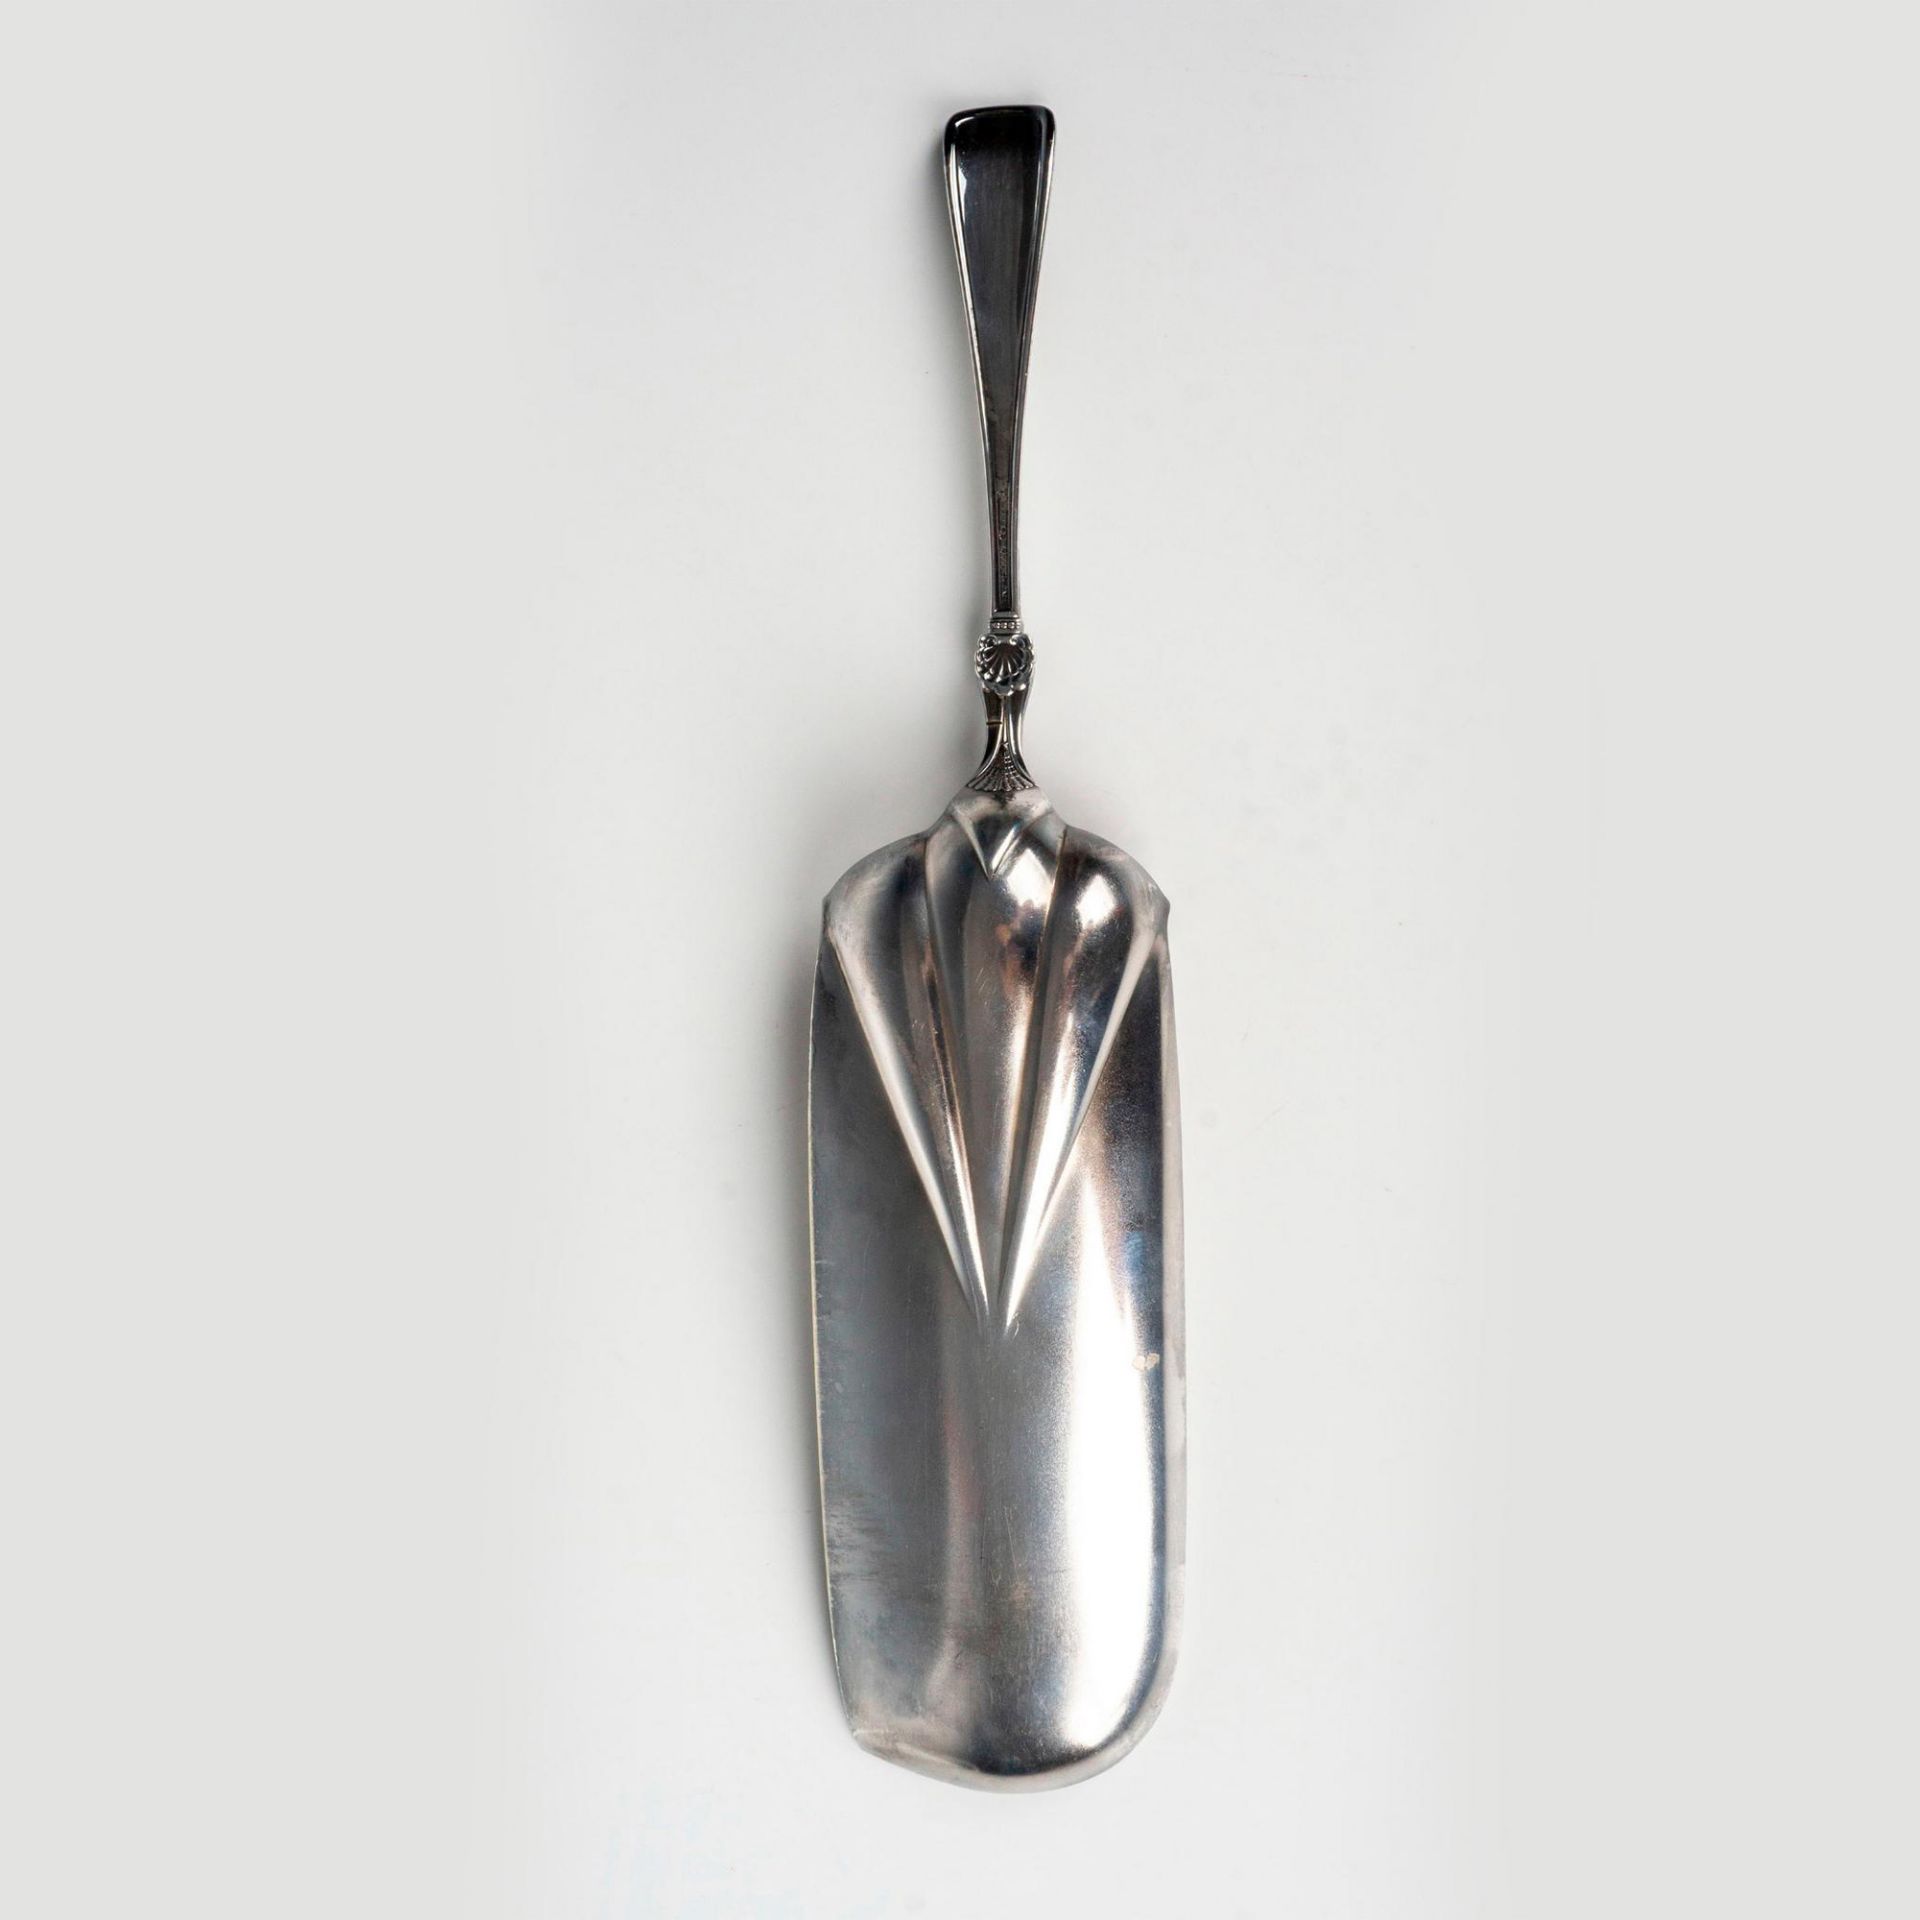 Gorham Silver Plated Large Crumb Knife, Princess Louise - Image 2 of 3